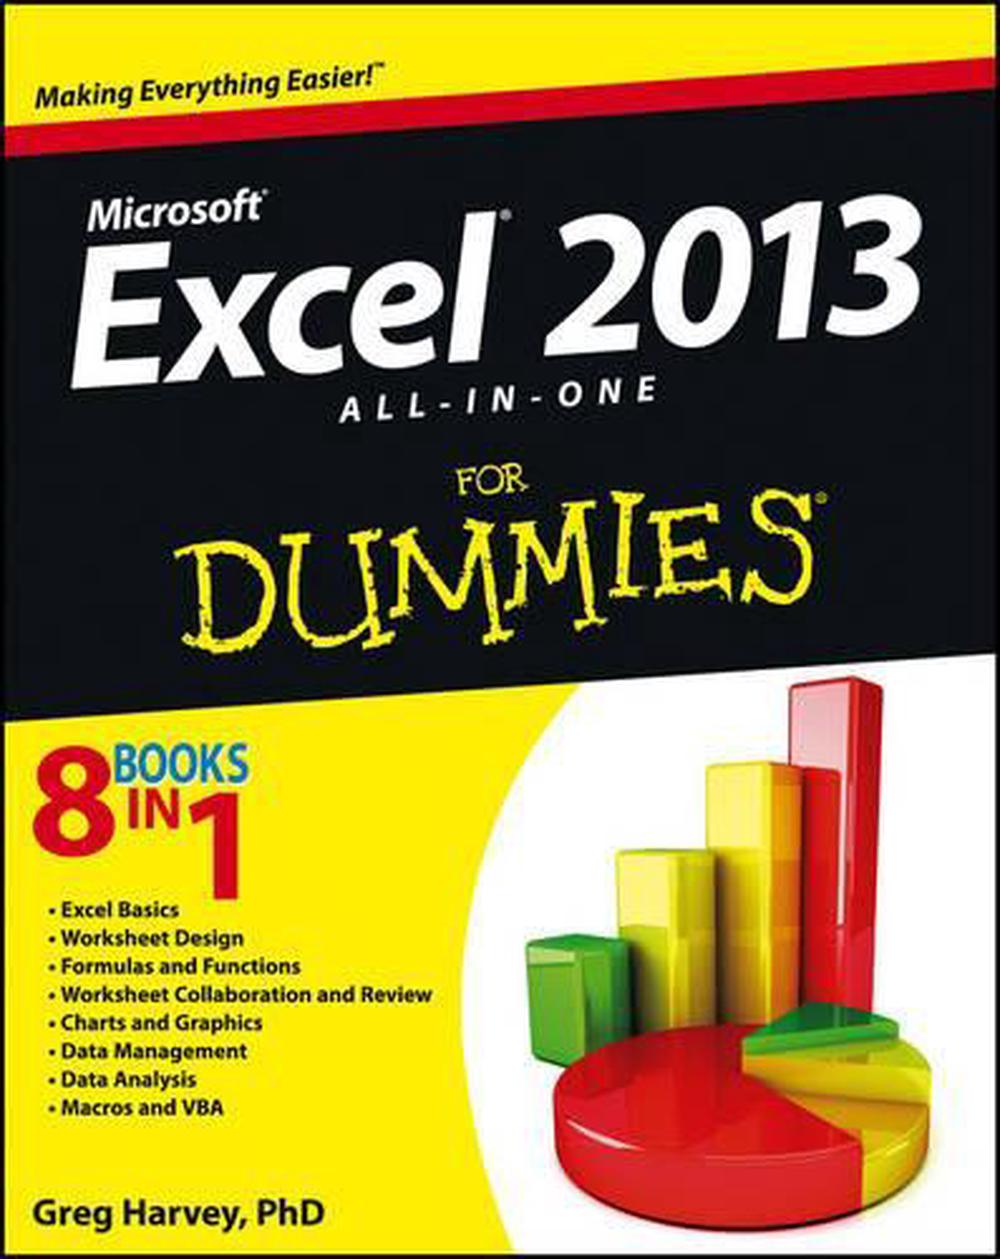 excel 2013 for dummies